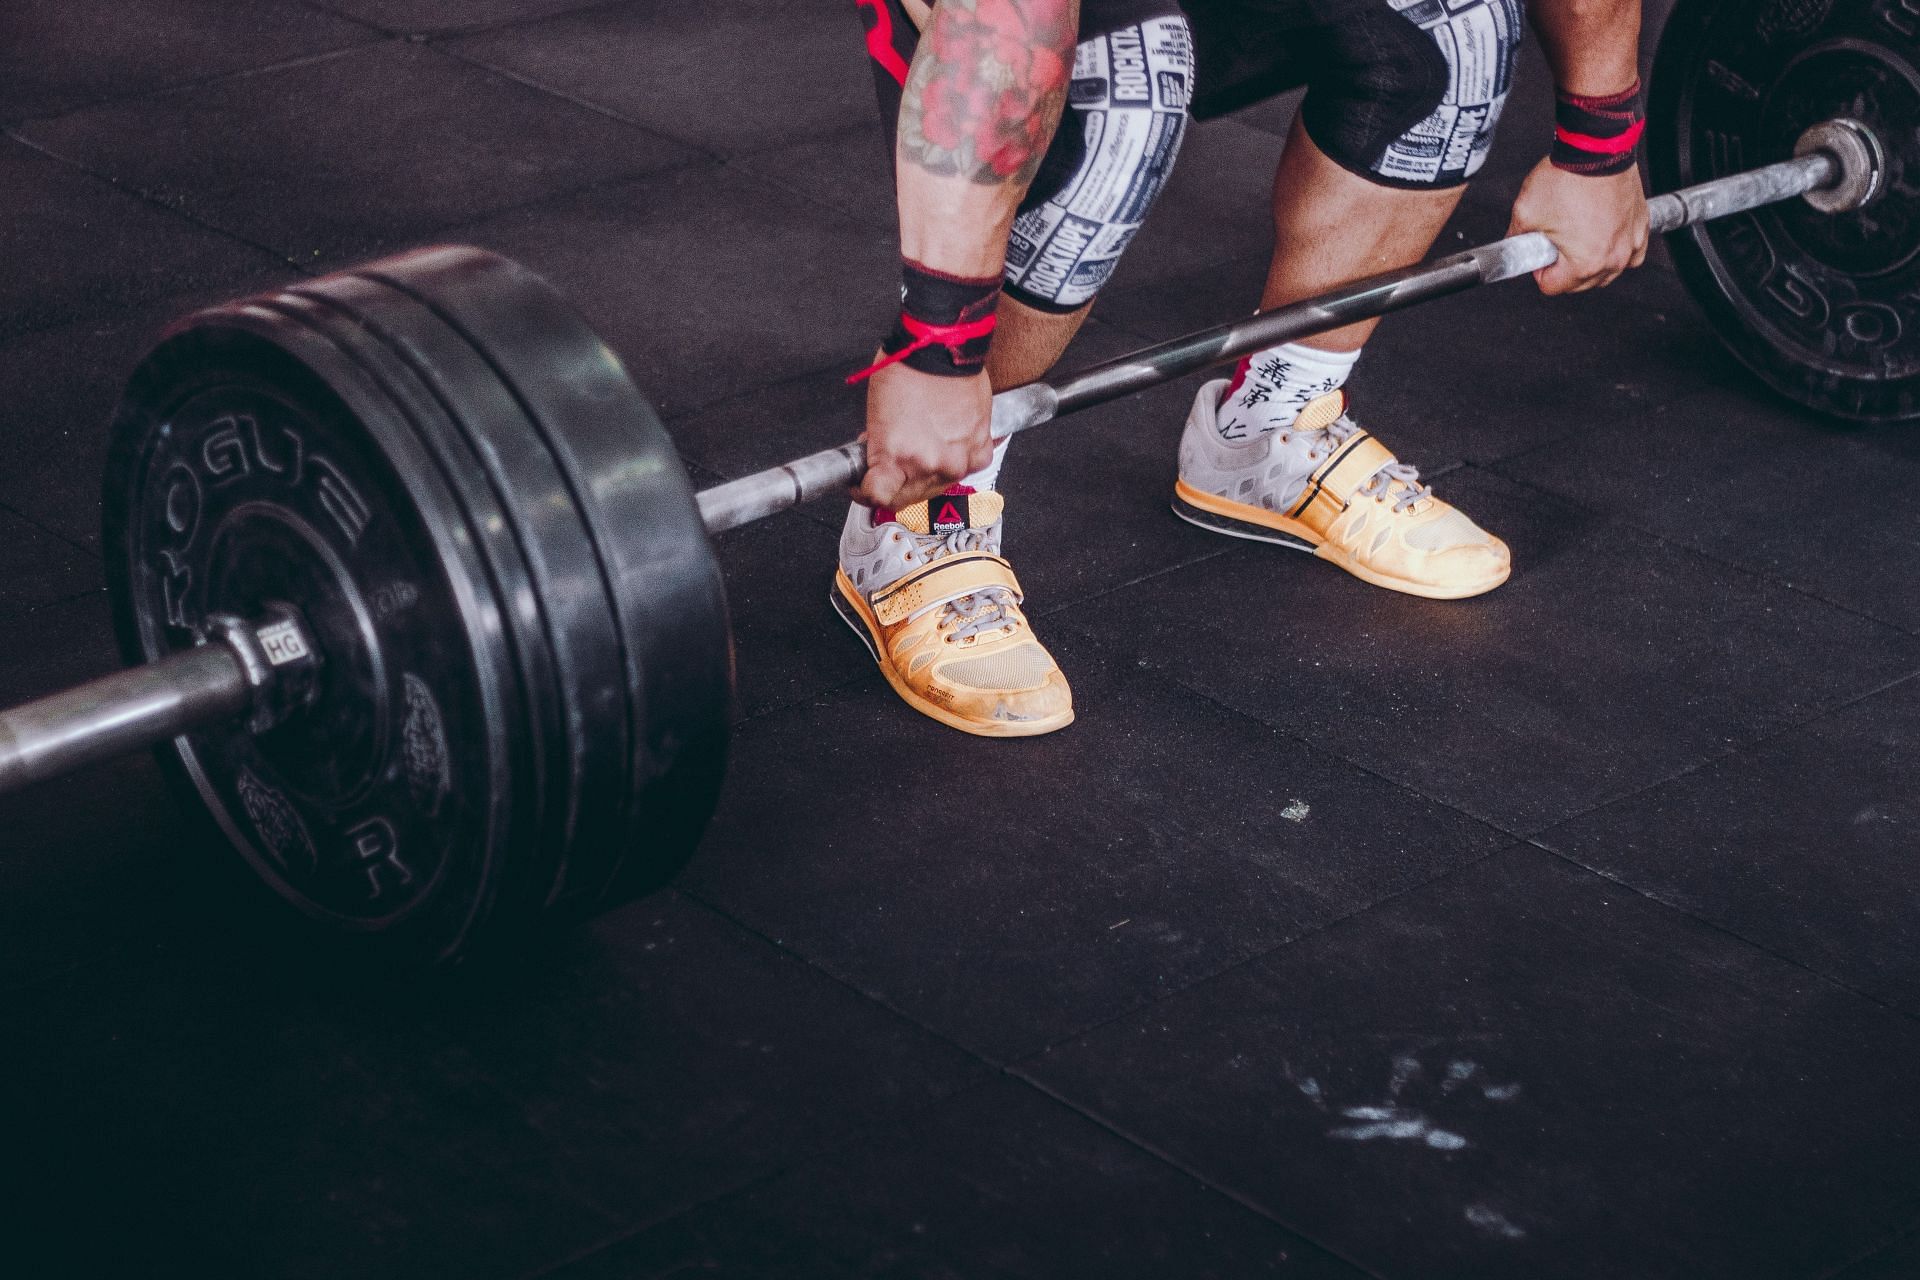 deadlifts burn a significant amount of calories and increase your heart rate. (Photo by Victor Freitas/pexels)